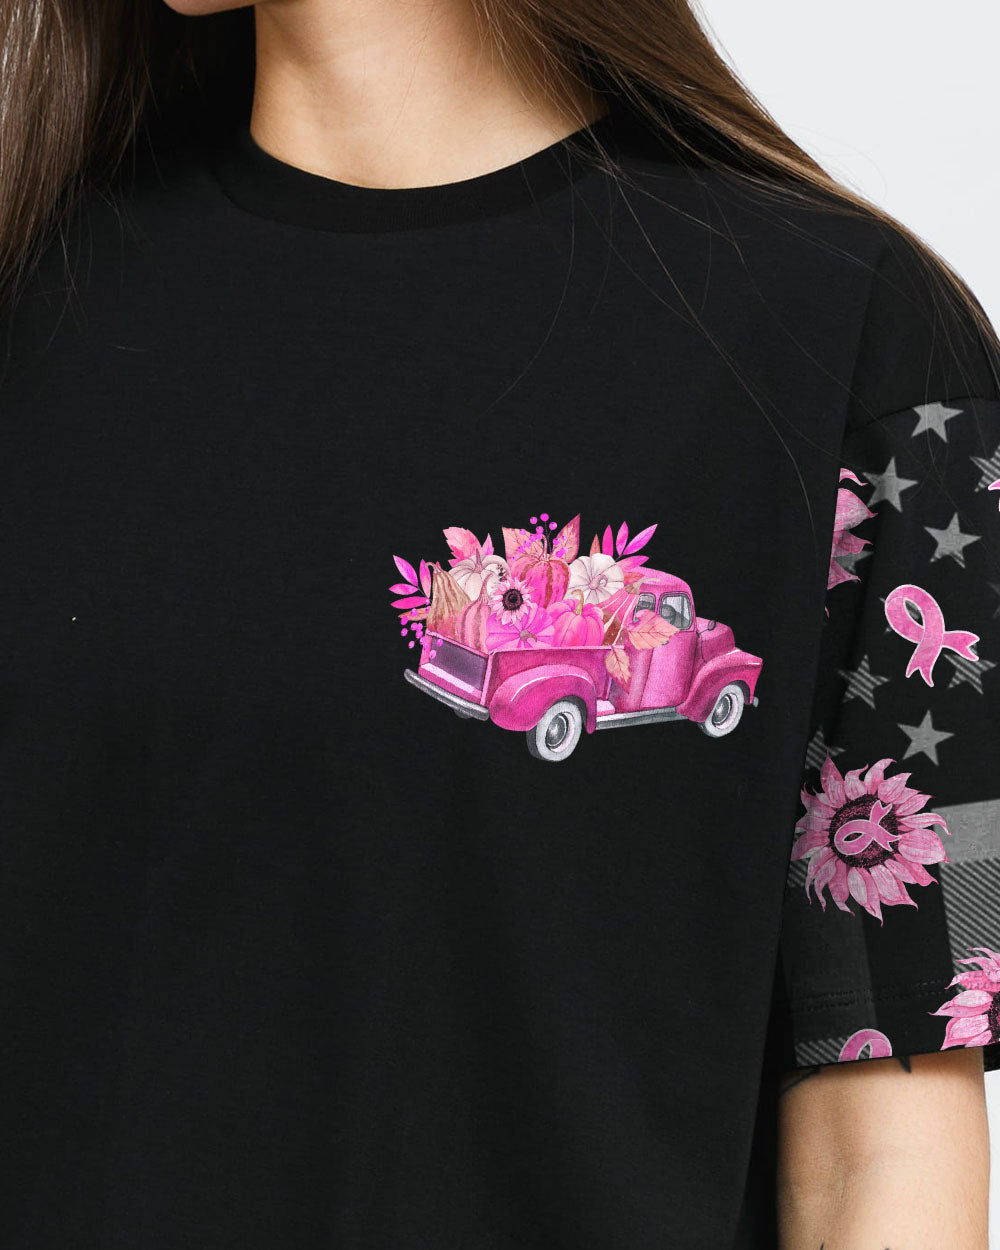 In October We Wear Pink Truck Flag Women's Breast Cancer Awareness Tshirt